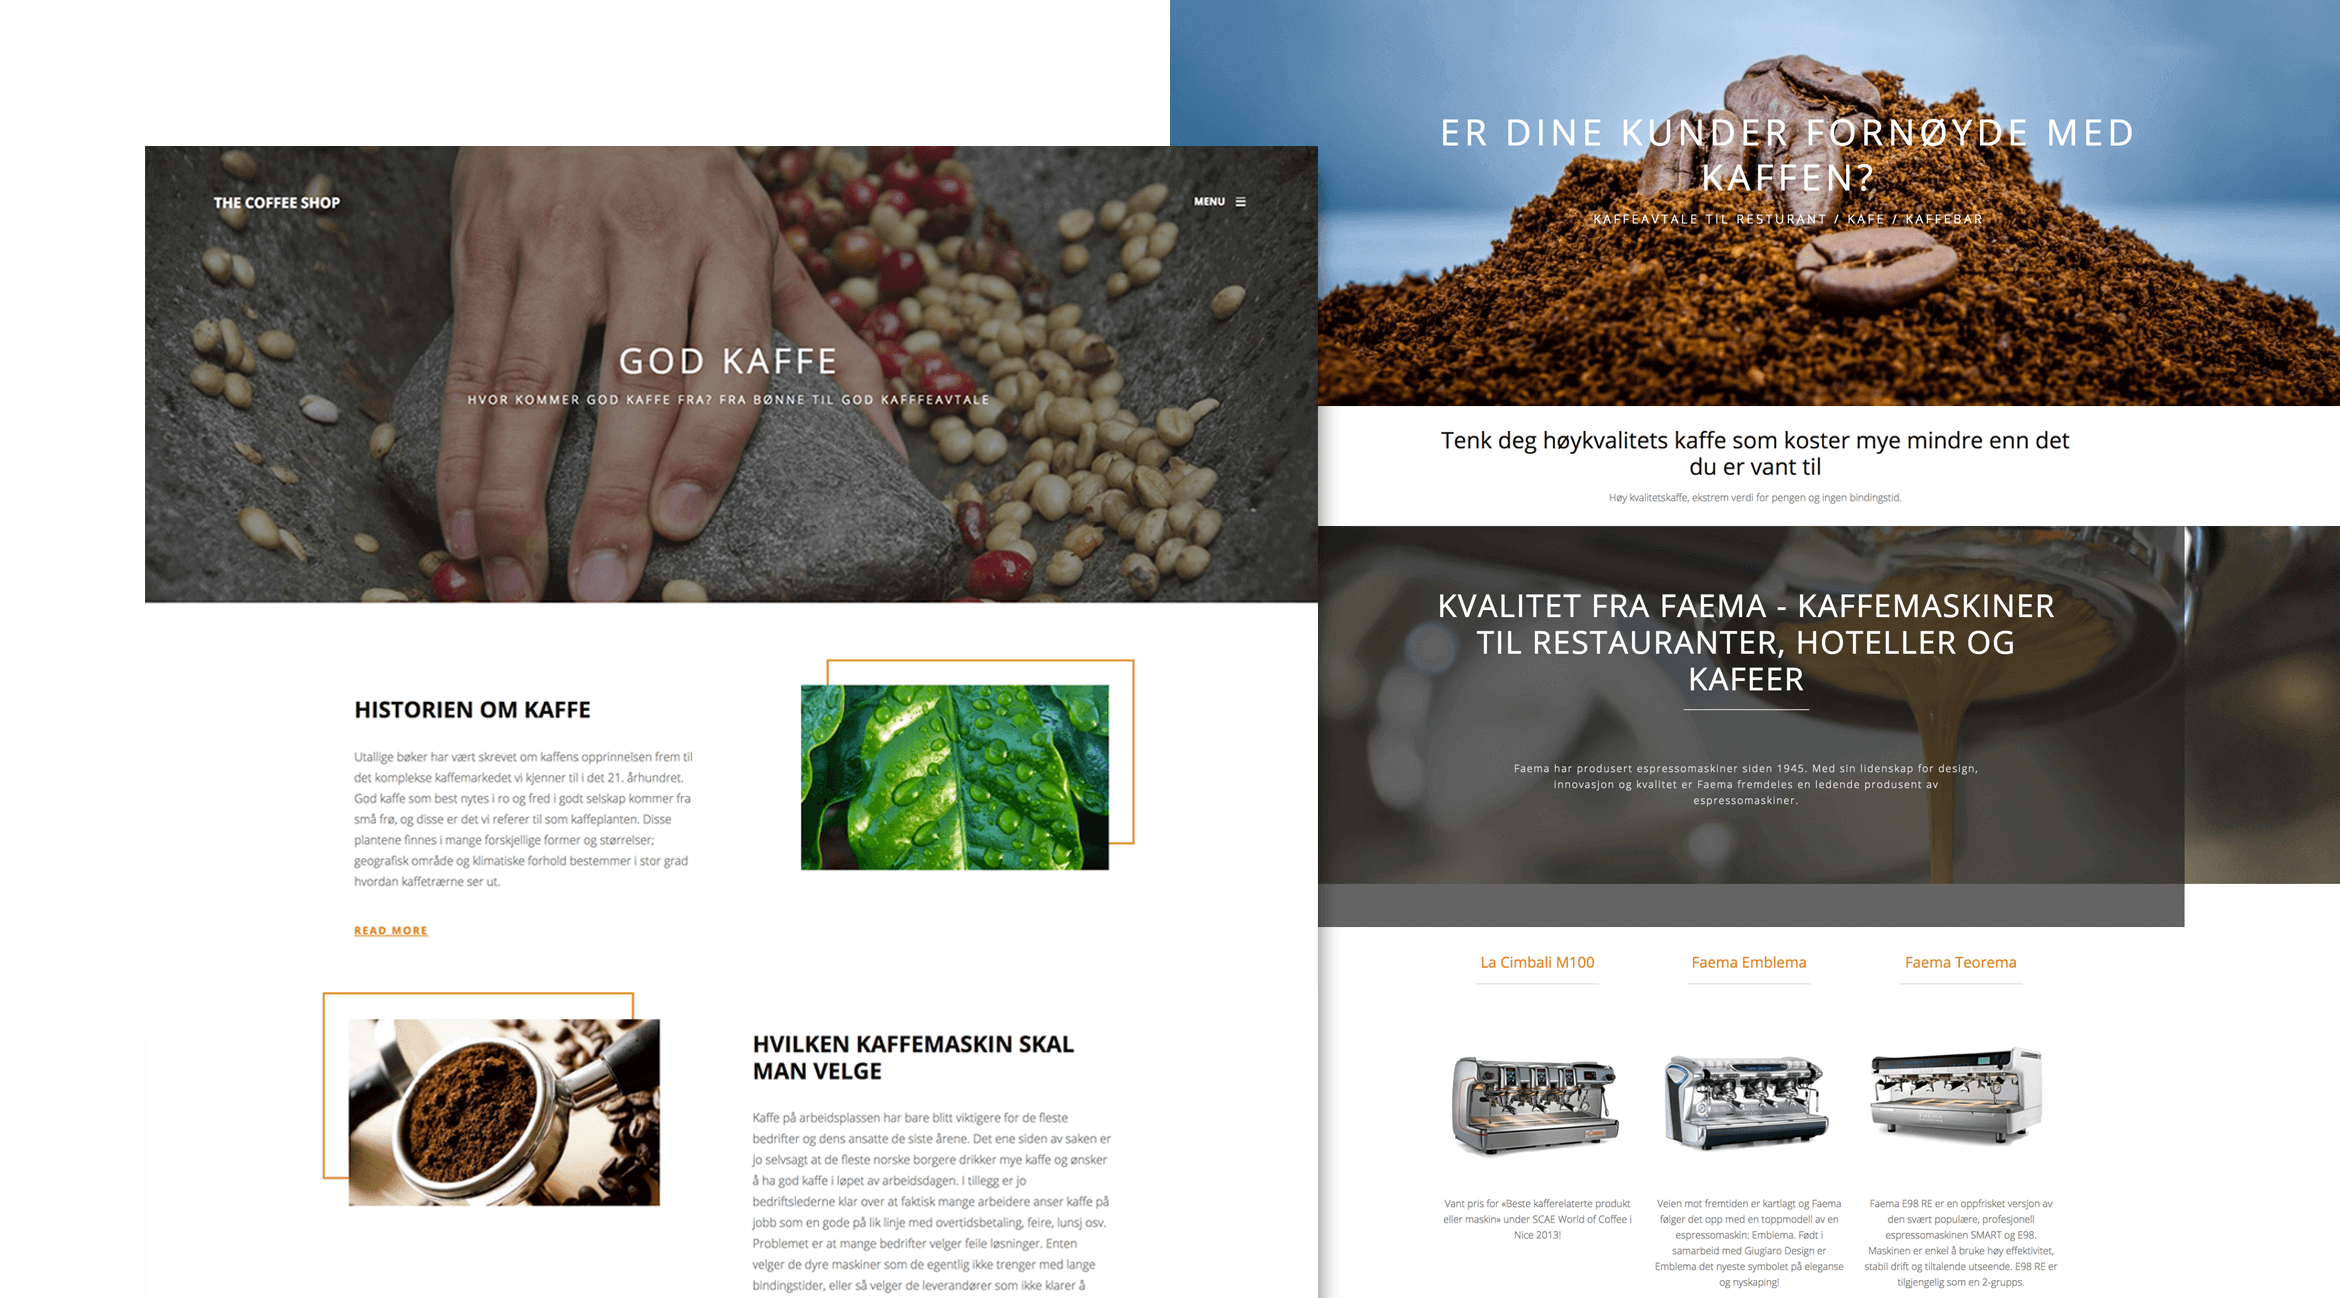 The Coffee Shop Website Design Service by Resolution Studio